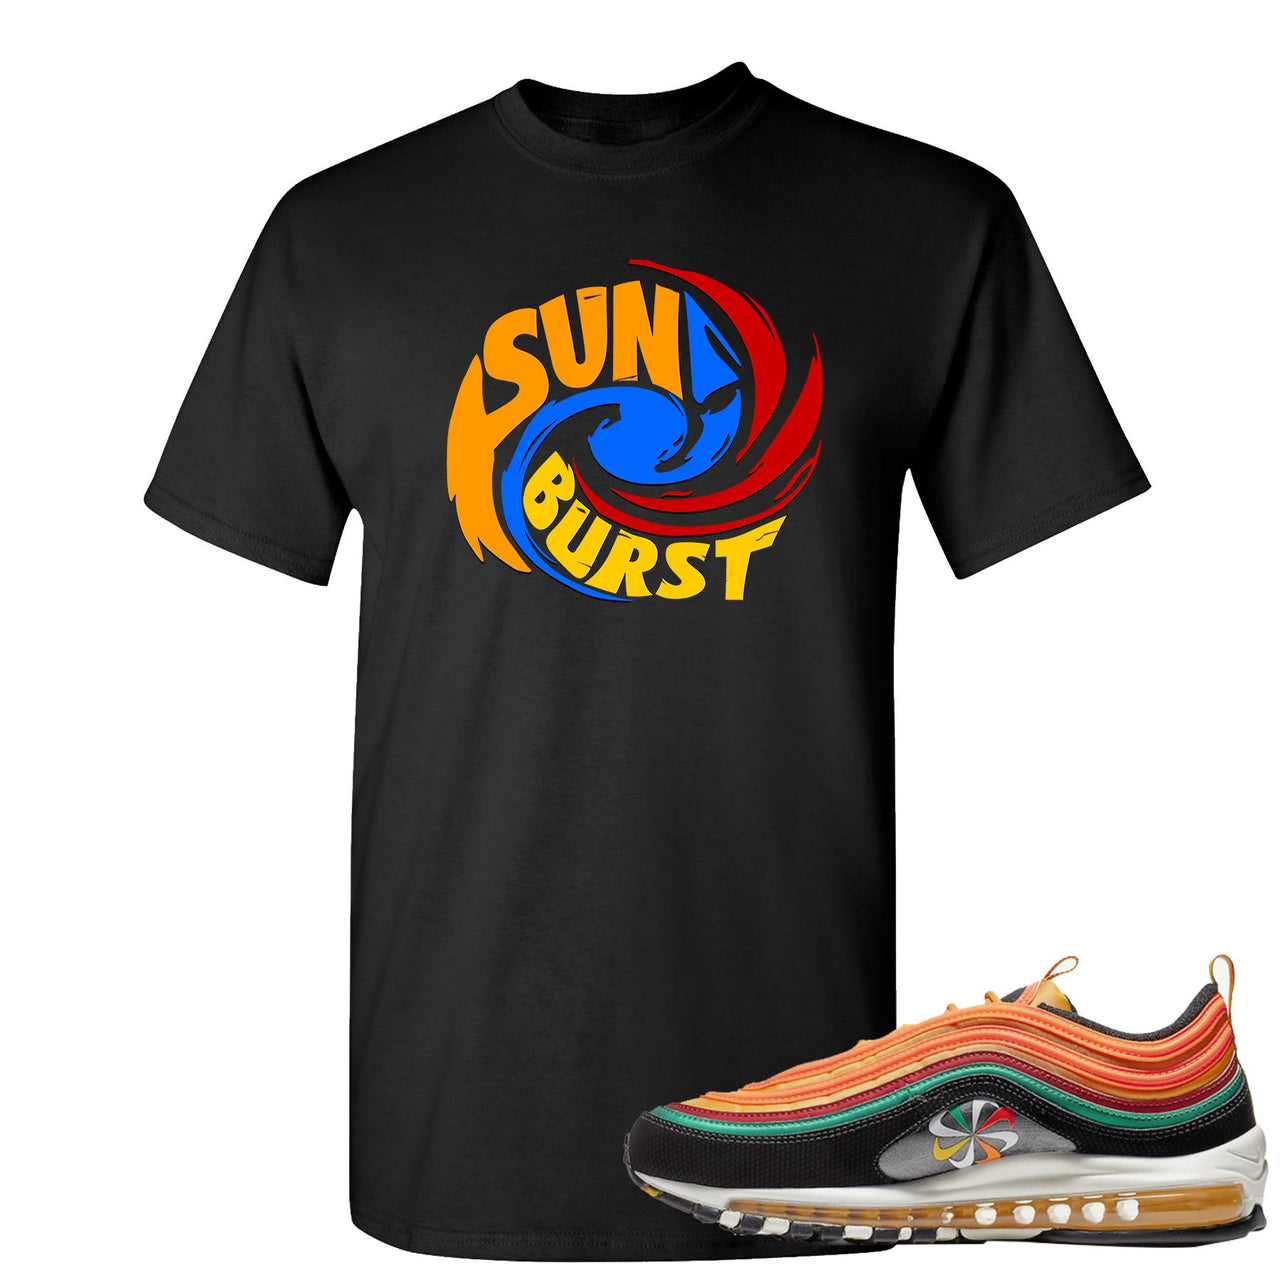 Printed on the front of the Air Max 97 Sunburst black sneaker matching t-shirt is the Sunburst Hurricane logo